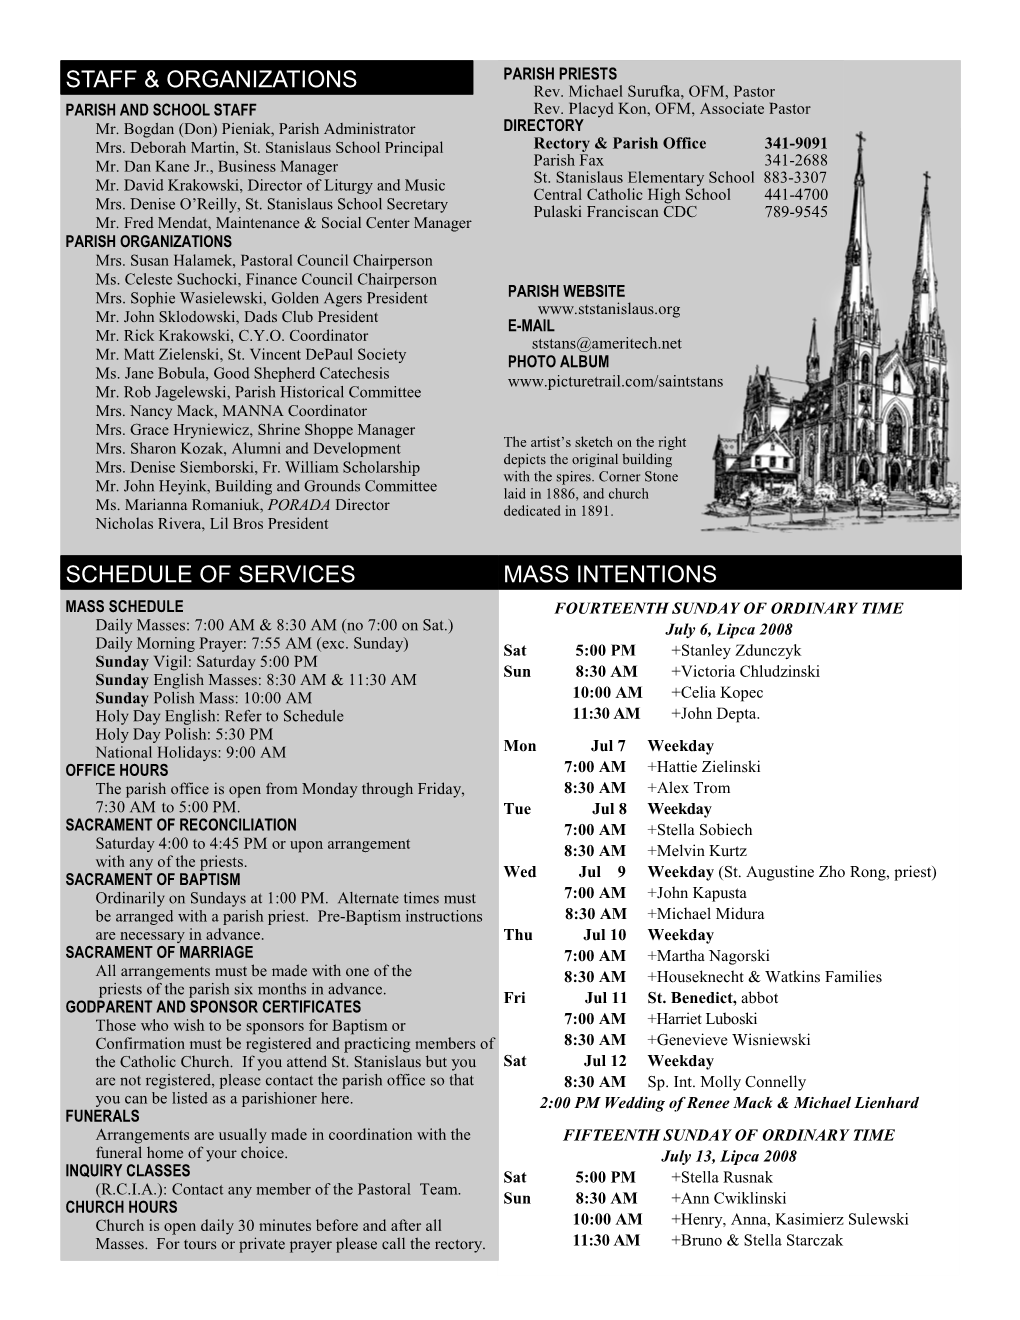 Schedule of Services Mass Intentions Staff